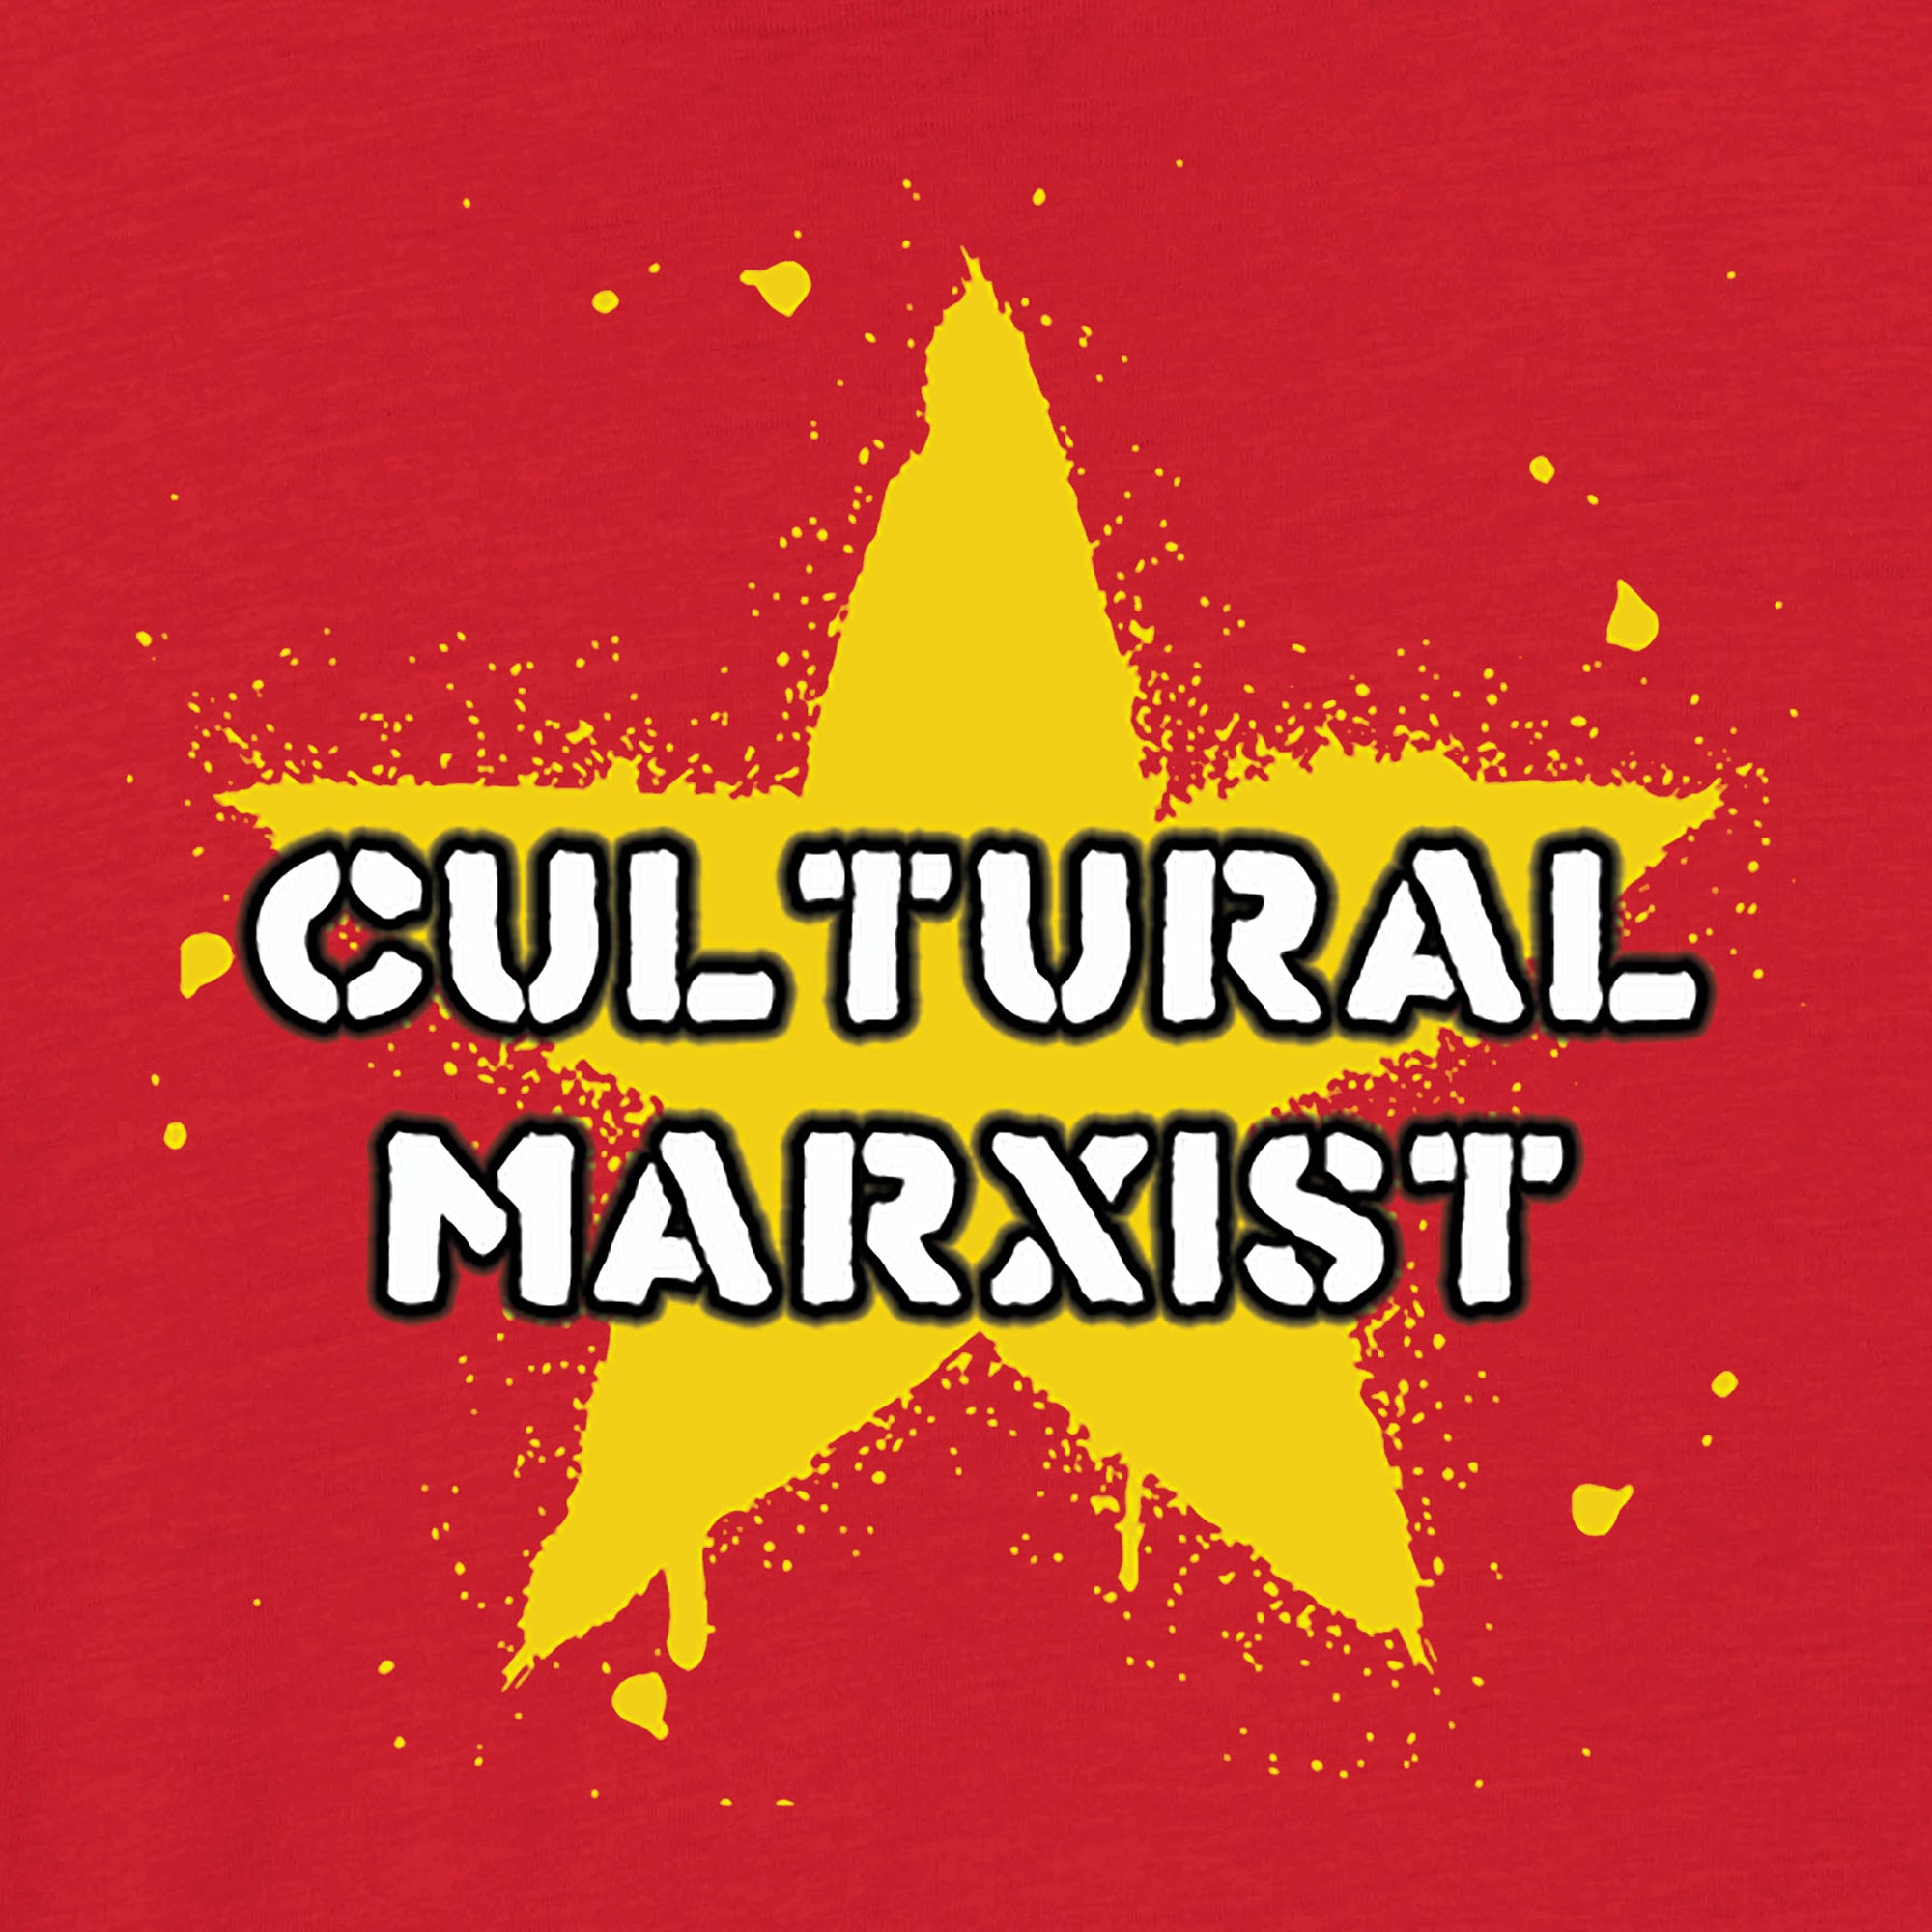 HEAVY MANNERS - Cultural Marxist (Bright Red) T shirt